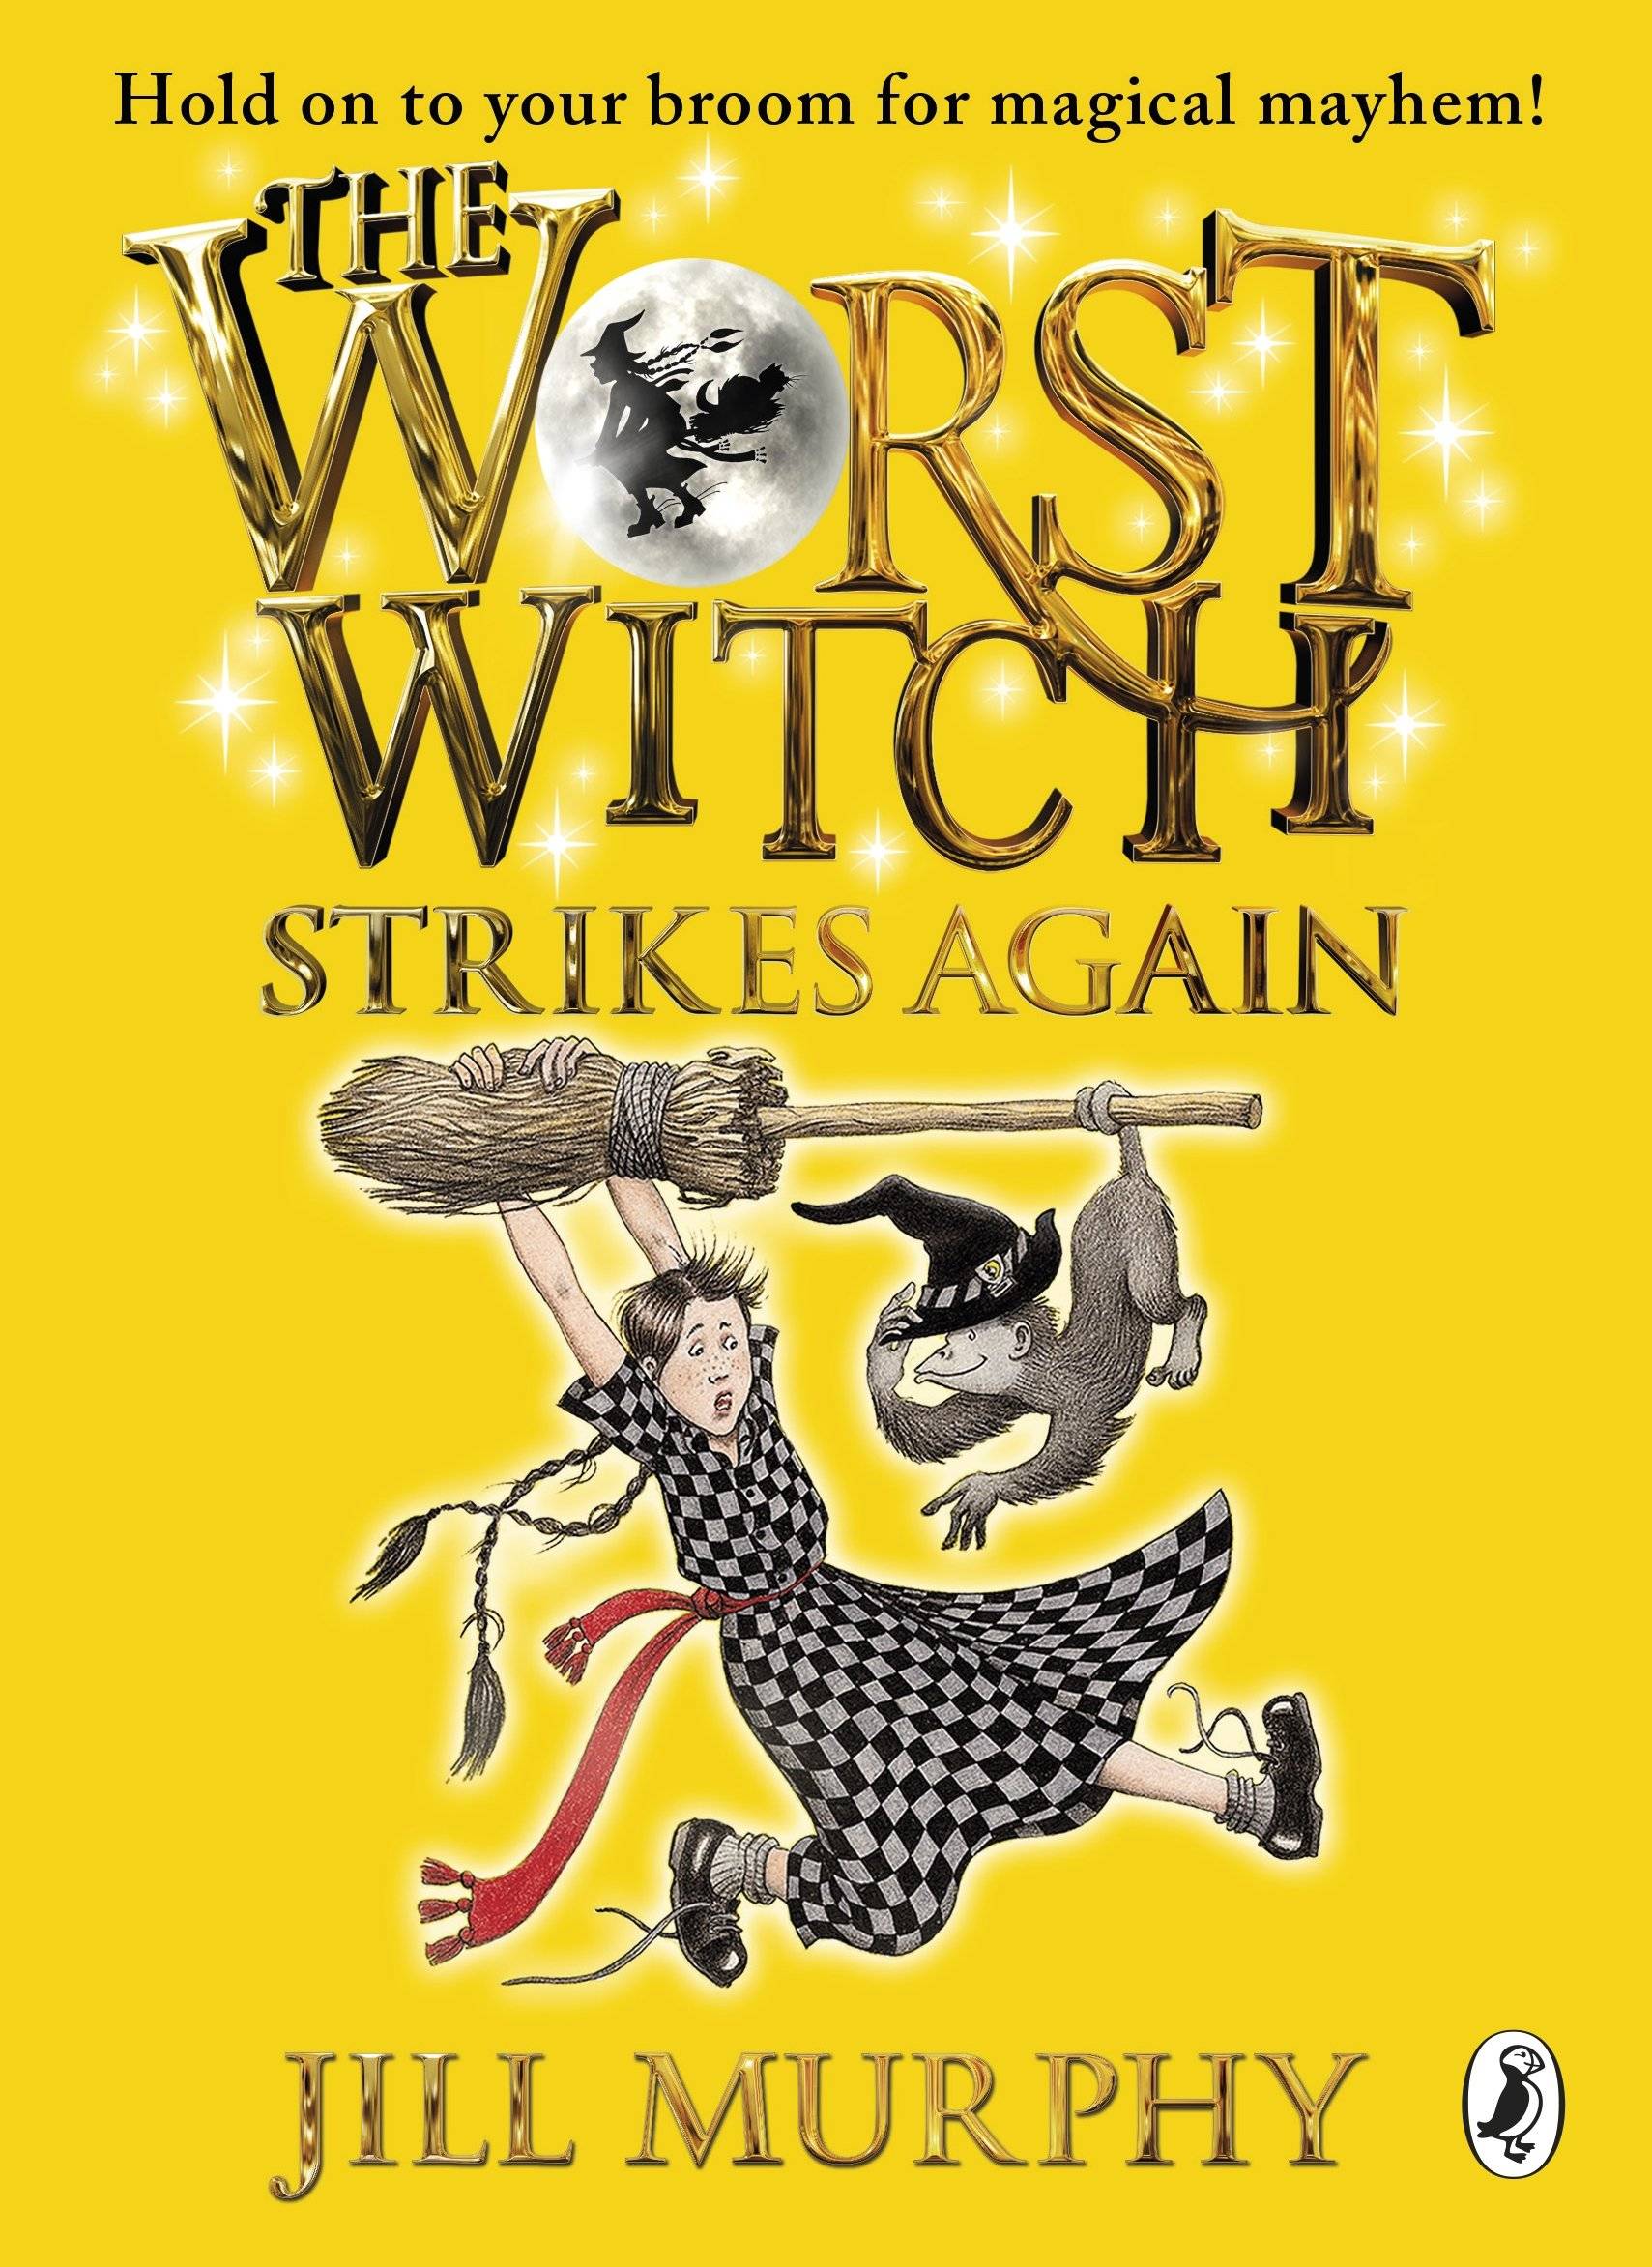 IMG : The Worst Witch Strikes Again